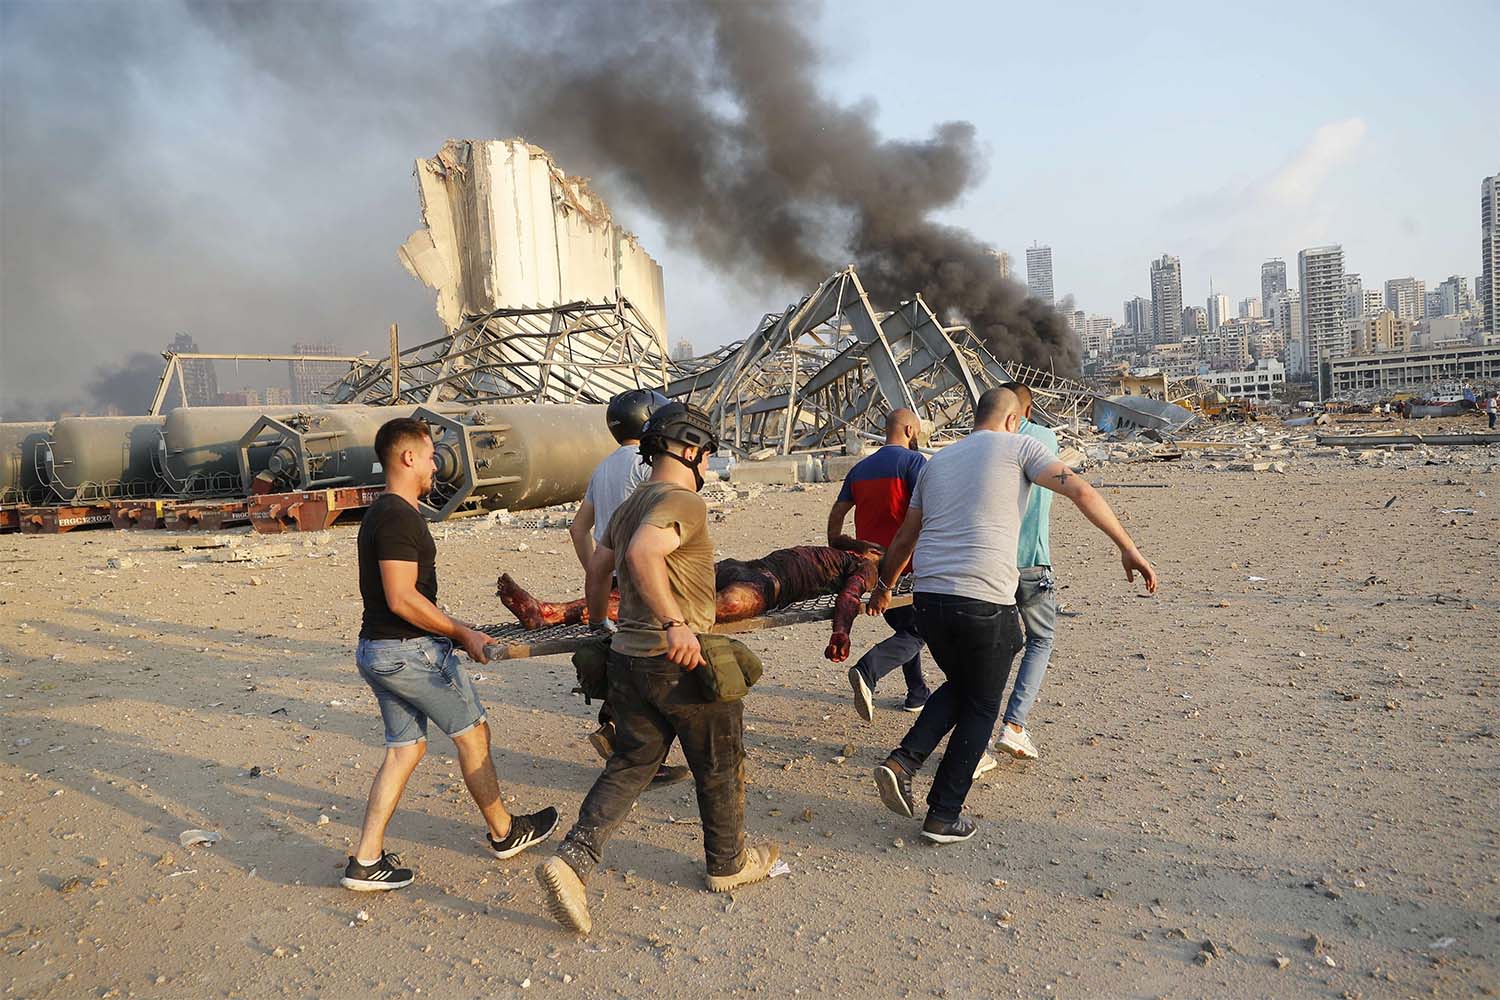 Civilians carry a person at the explosion scene that hit the seaport, in Beirut 